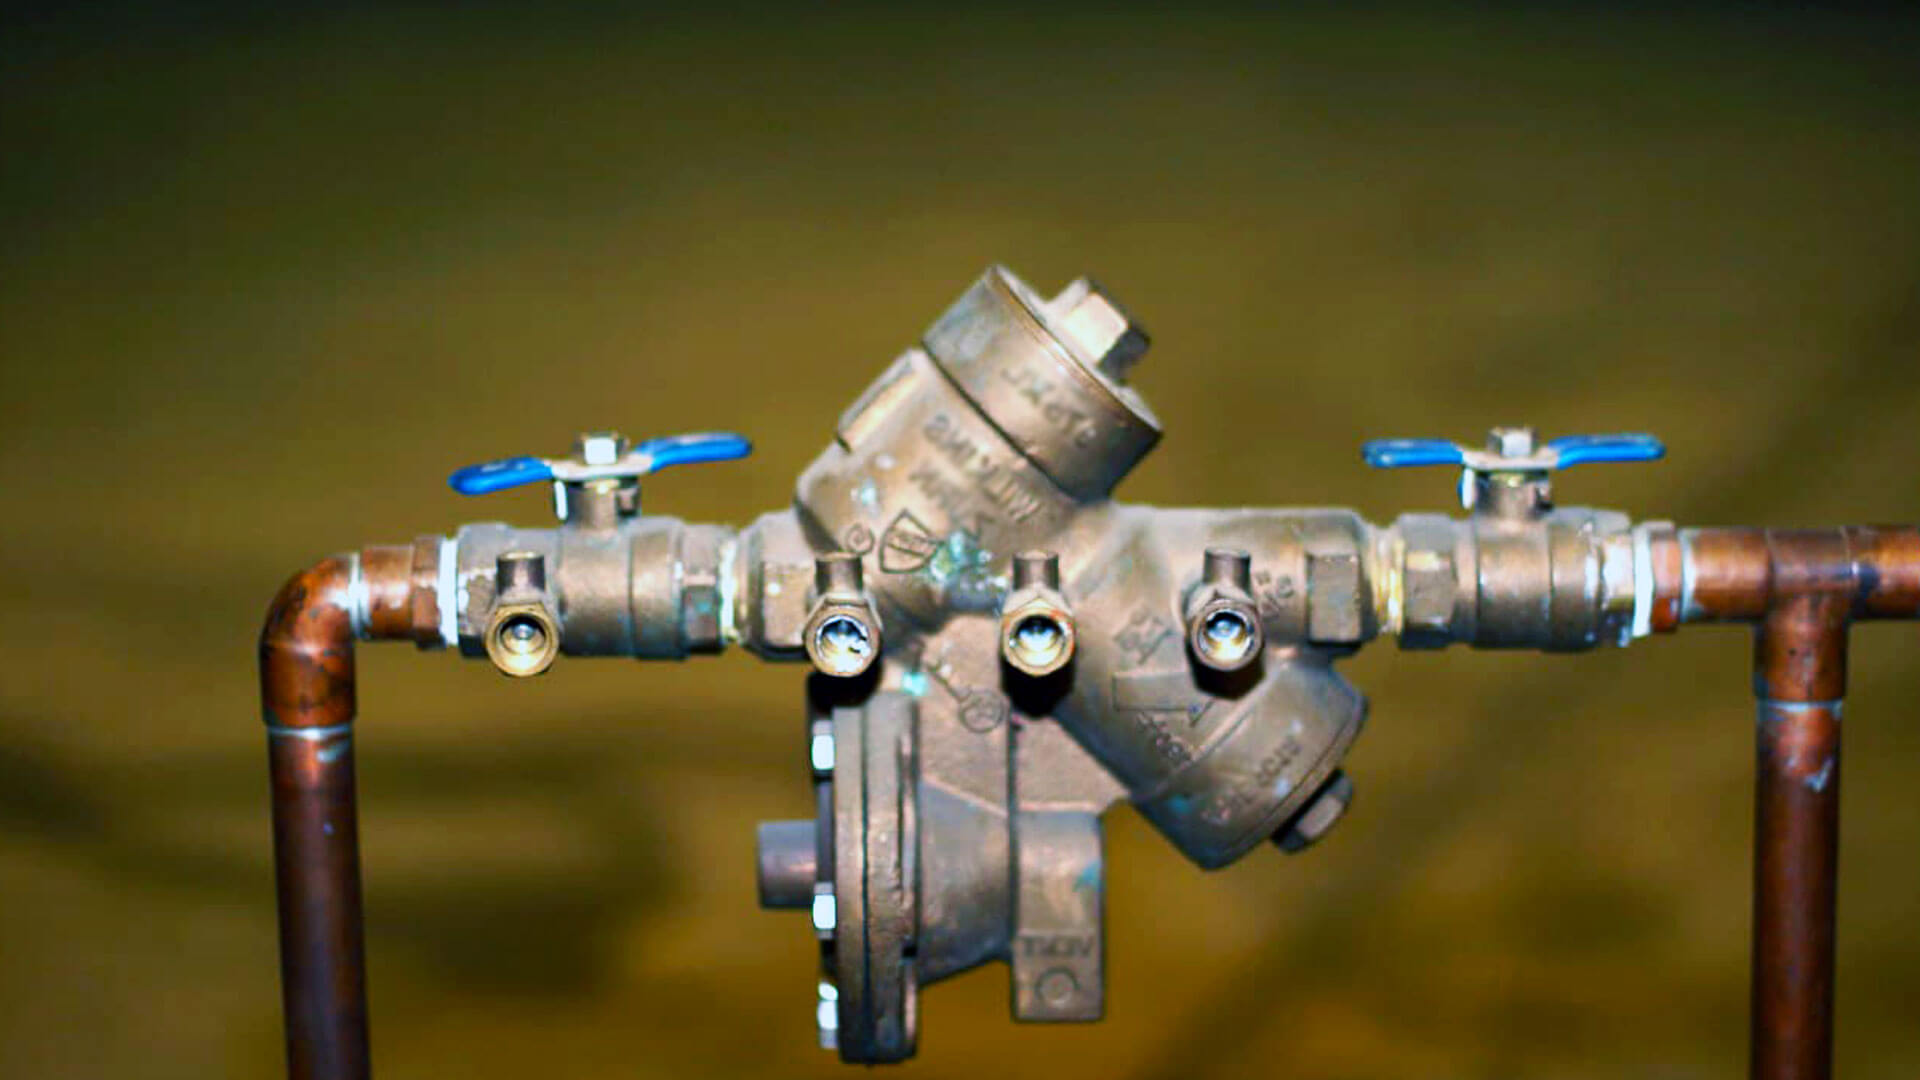 Backflow prevention Canberra is critical to ensuring the safety of Australians’ drinking water. It ensures that the flow of water is not reversed due to a change in pressure, protecting our water supply from contamination.